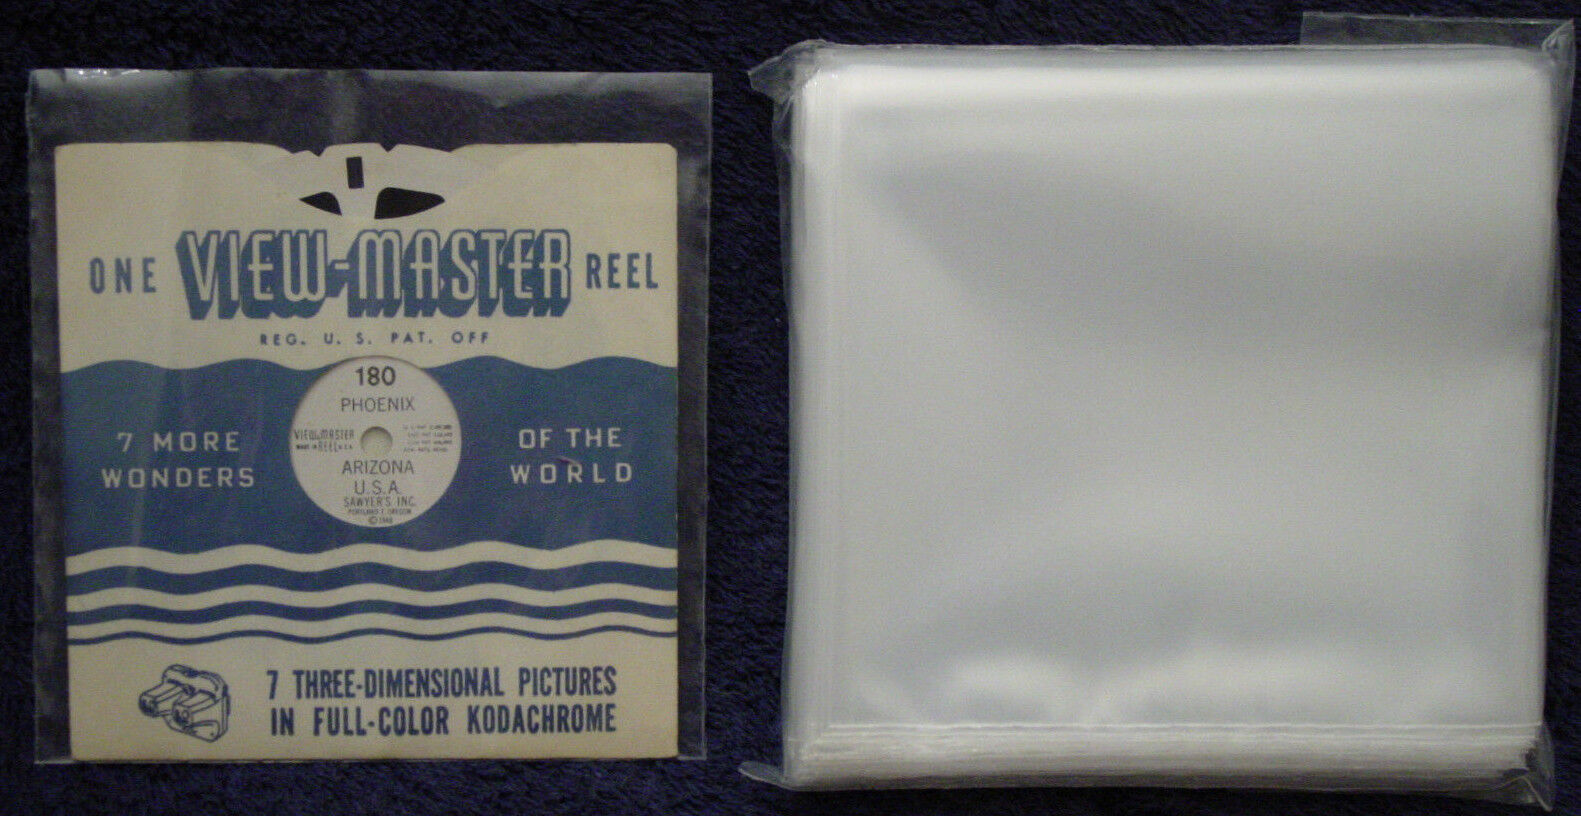 100 VIEW-MASTER SLEEVES Pack Clear 2.5mil ARCHIVAL Safe for REEL in Paper Sleeve